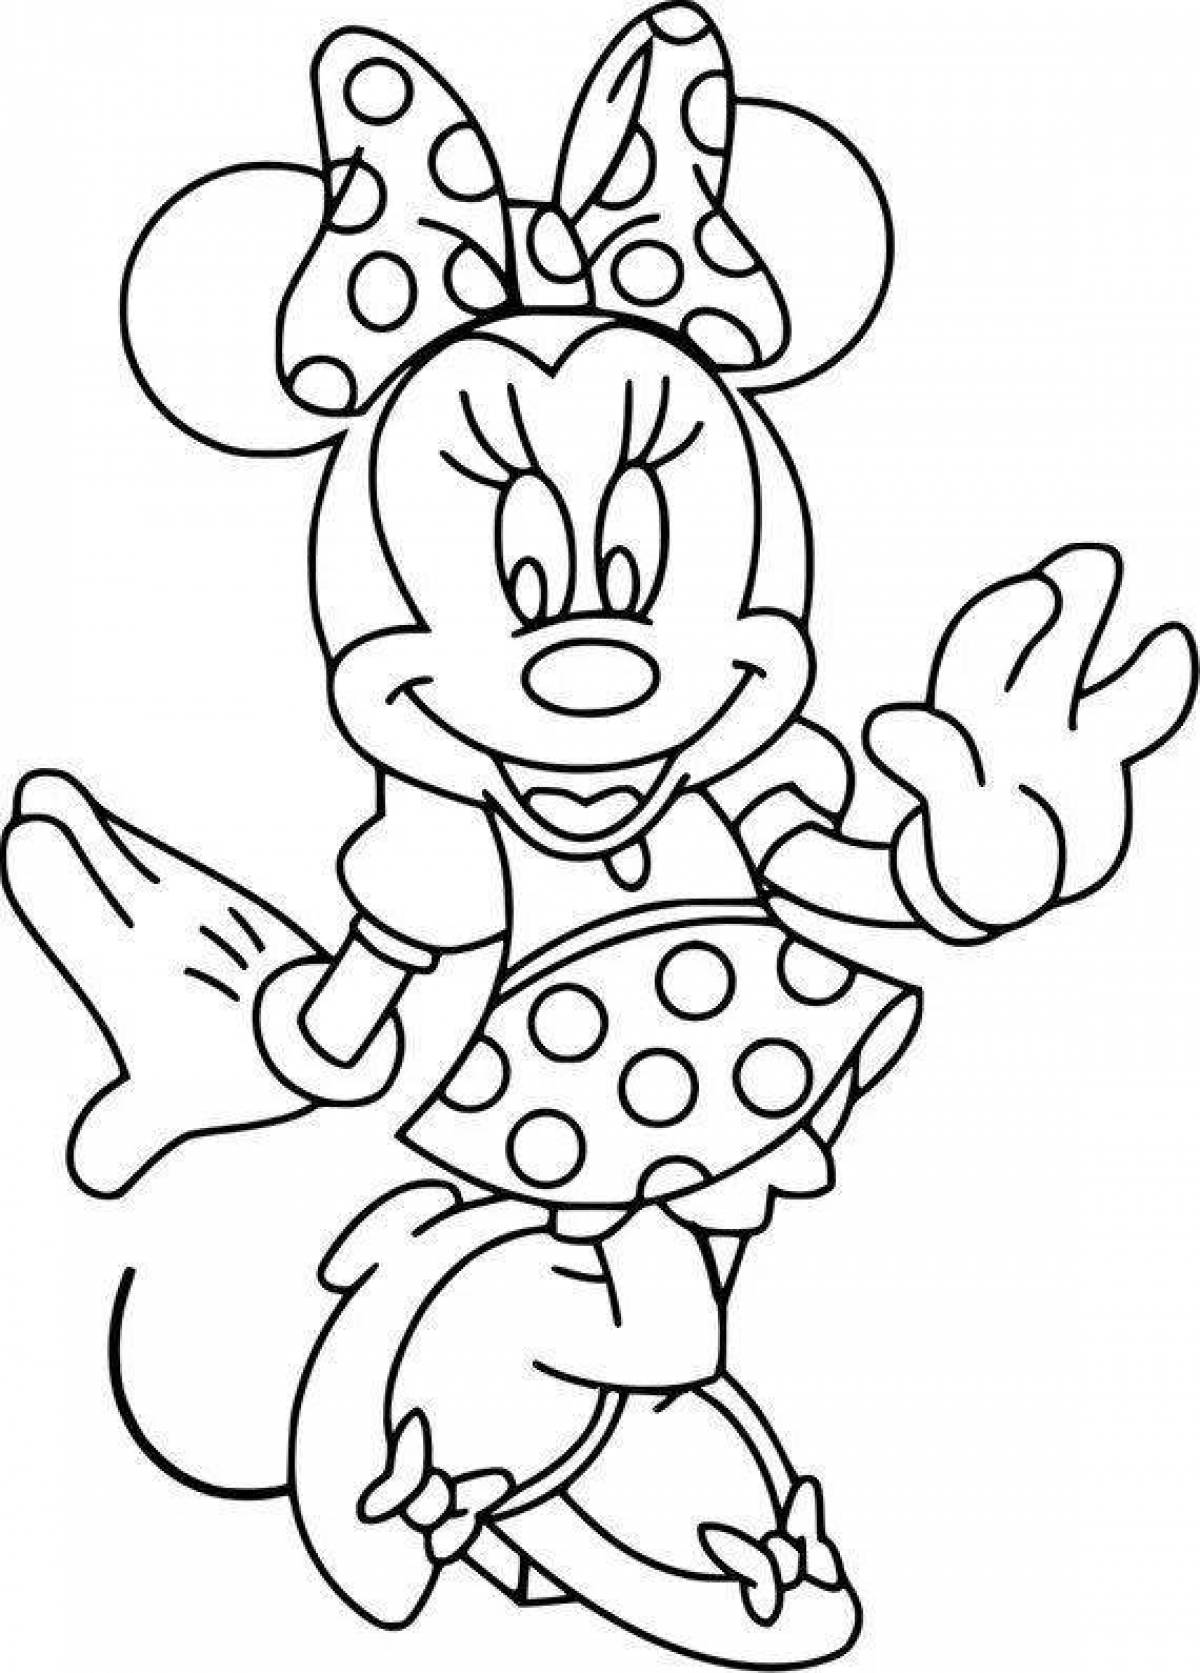 Animated coloring book for girls mikimaus